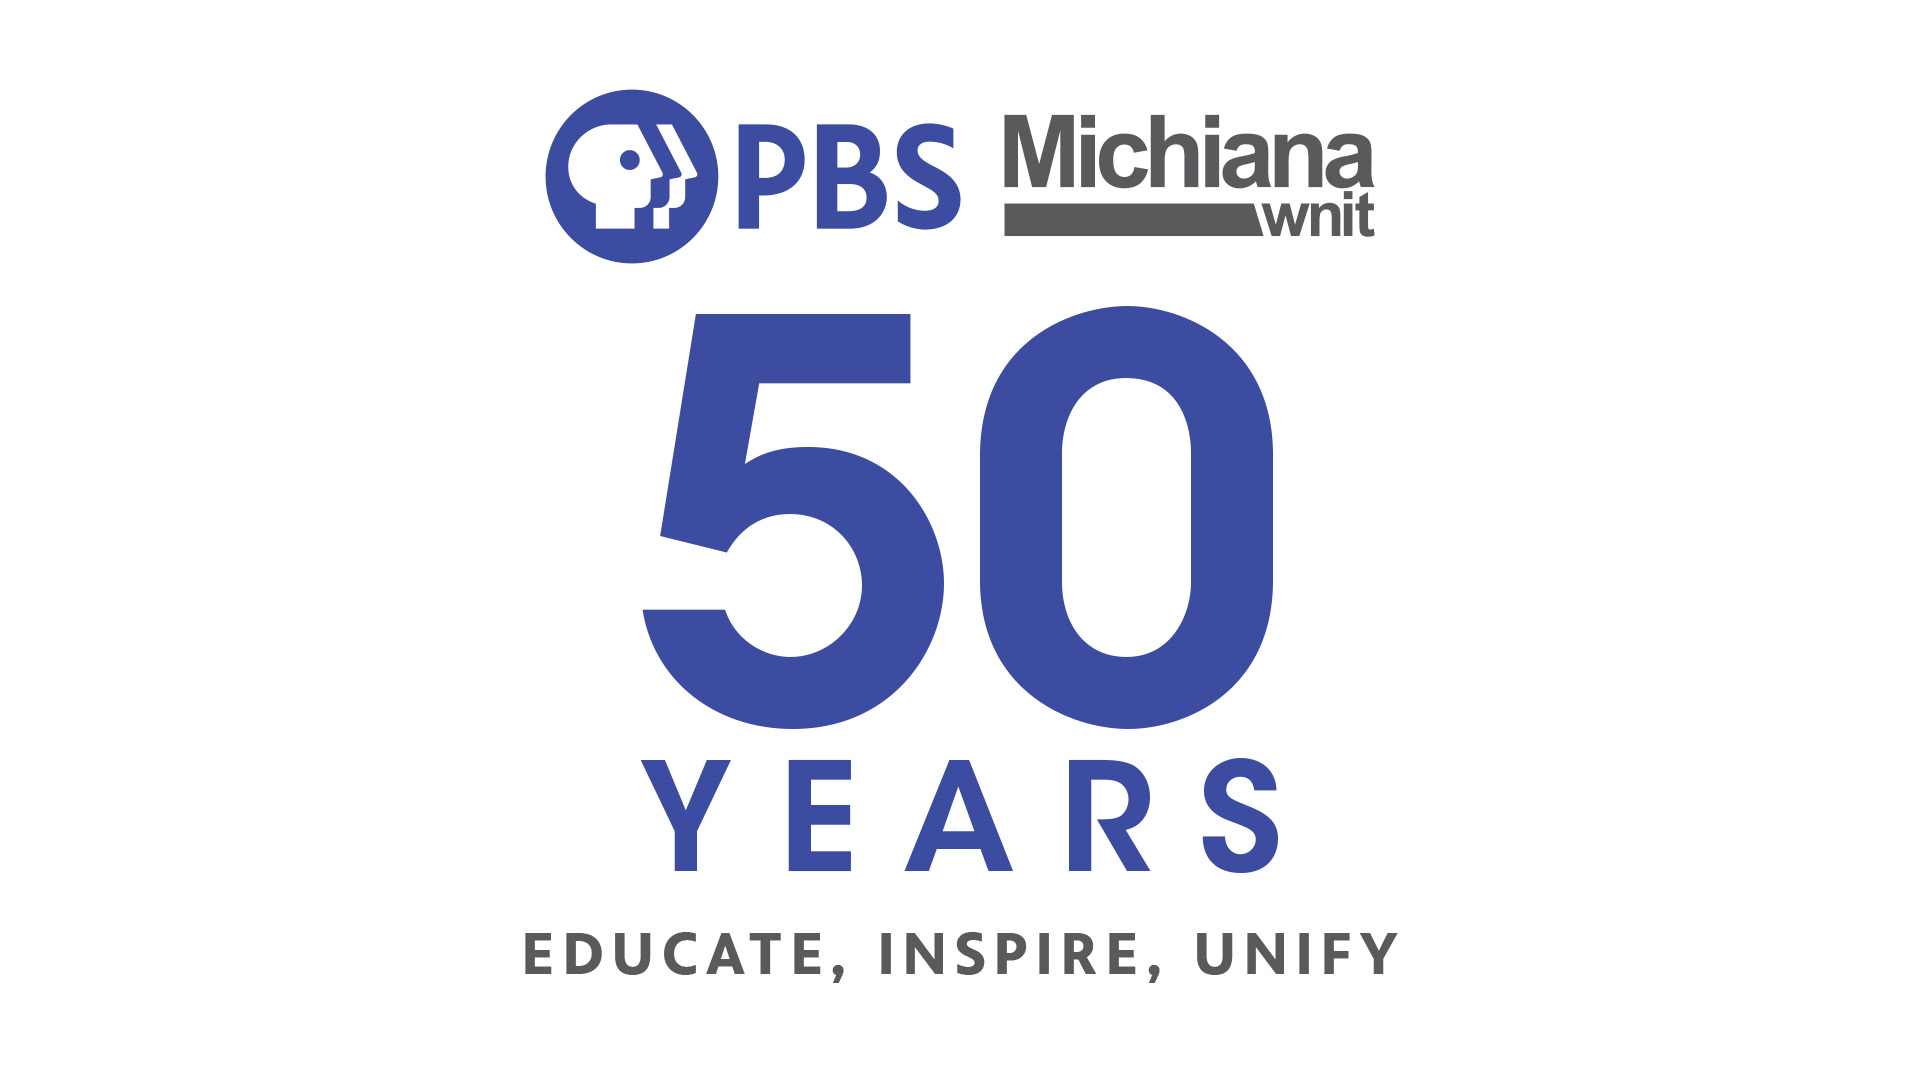 PBS Michiana – WNIT Celebrates 50 Years of Educational Excellence,  Inspiring Audiences, and Unifying Communities Photo